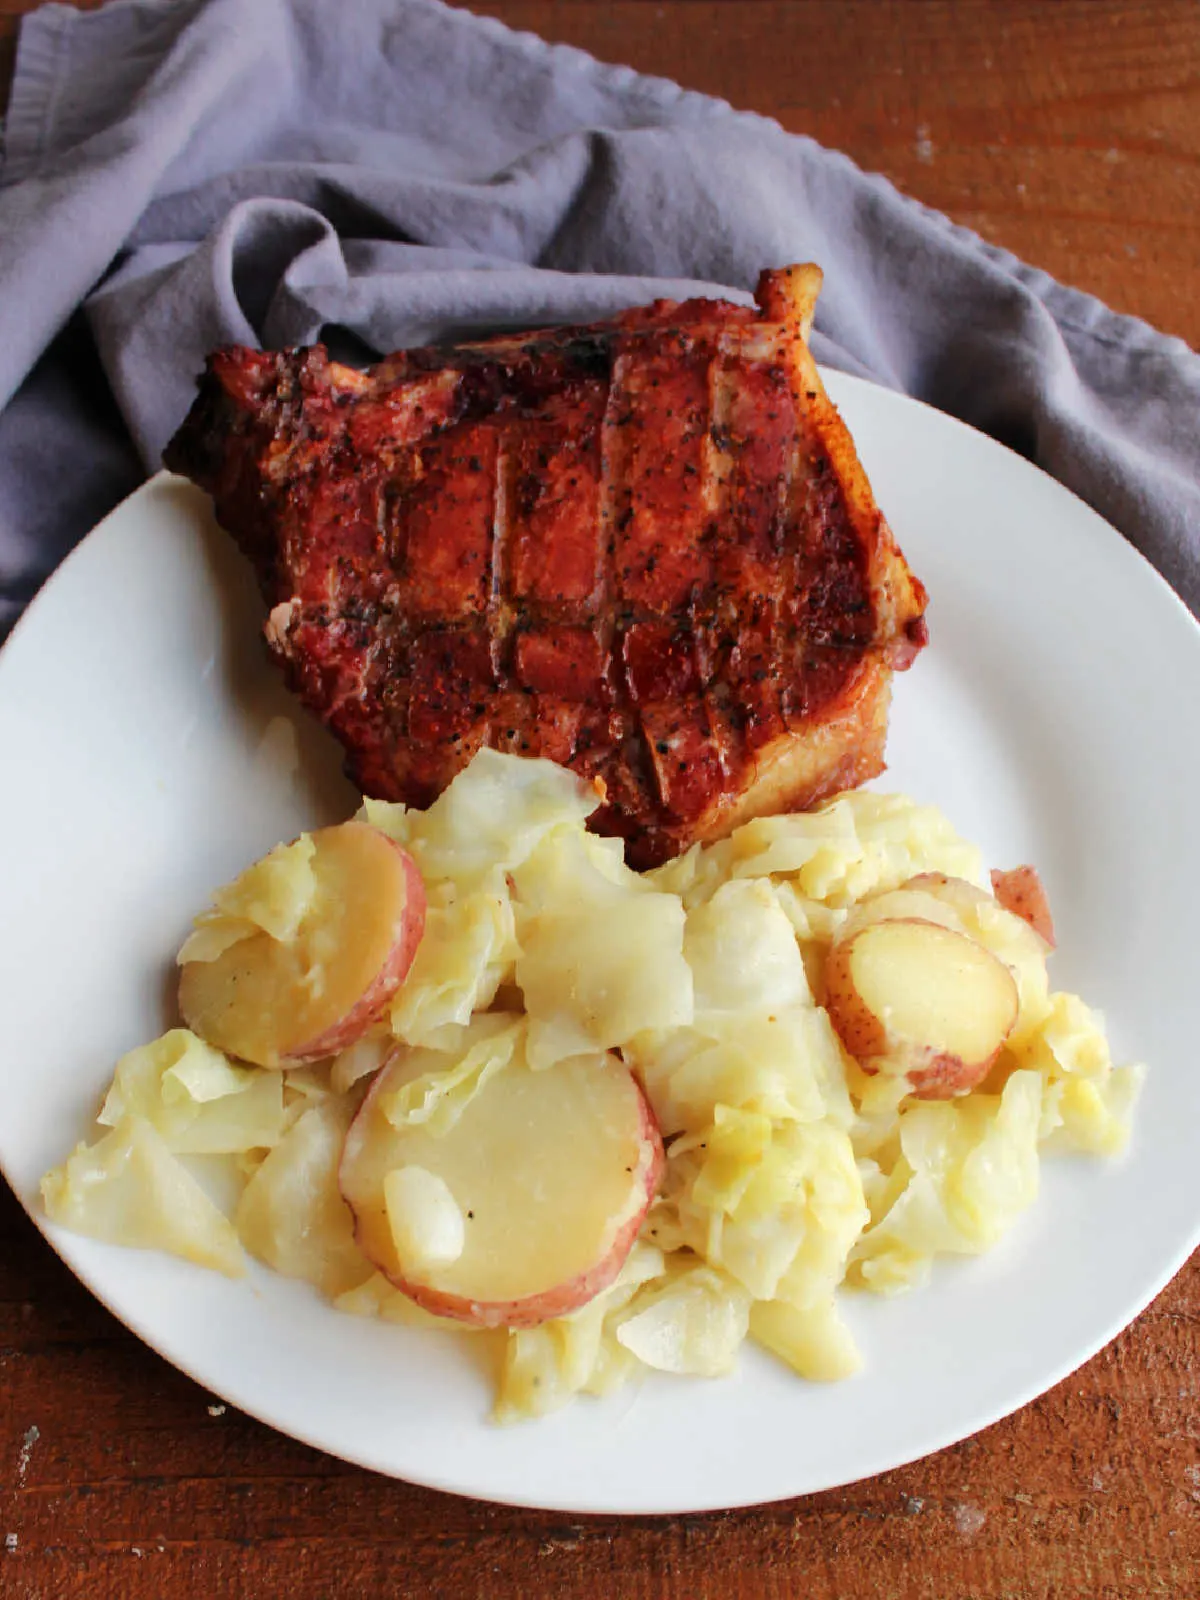 cabbage and potatoes with pork chop